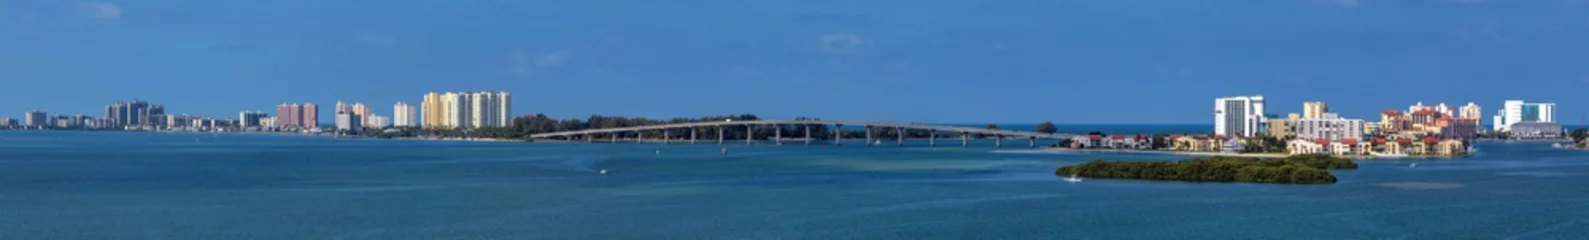 Photo sur Plexiglas Clearwater Beach, Floride Sand Key Bridge - A panoramic view of Sand Key Bridge, connecting Clearwater at right and Belleair Beach at left, over the Clearwater Pass on a calm Autumn morning, Florida, USA.